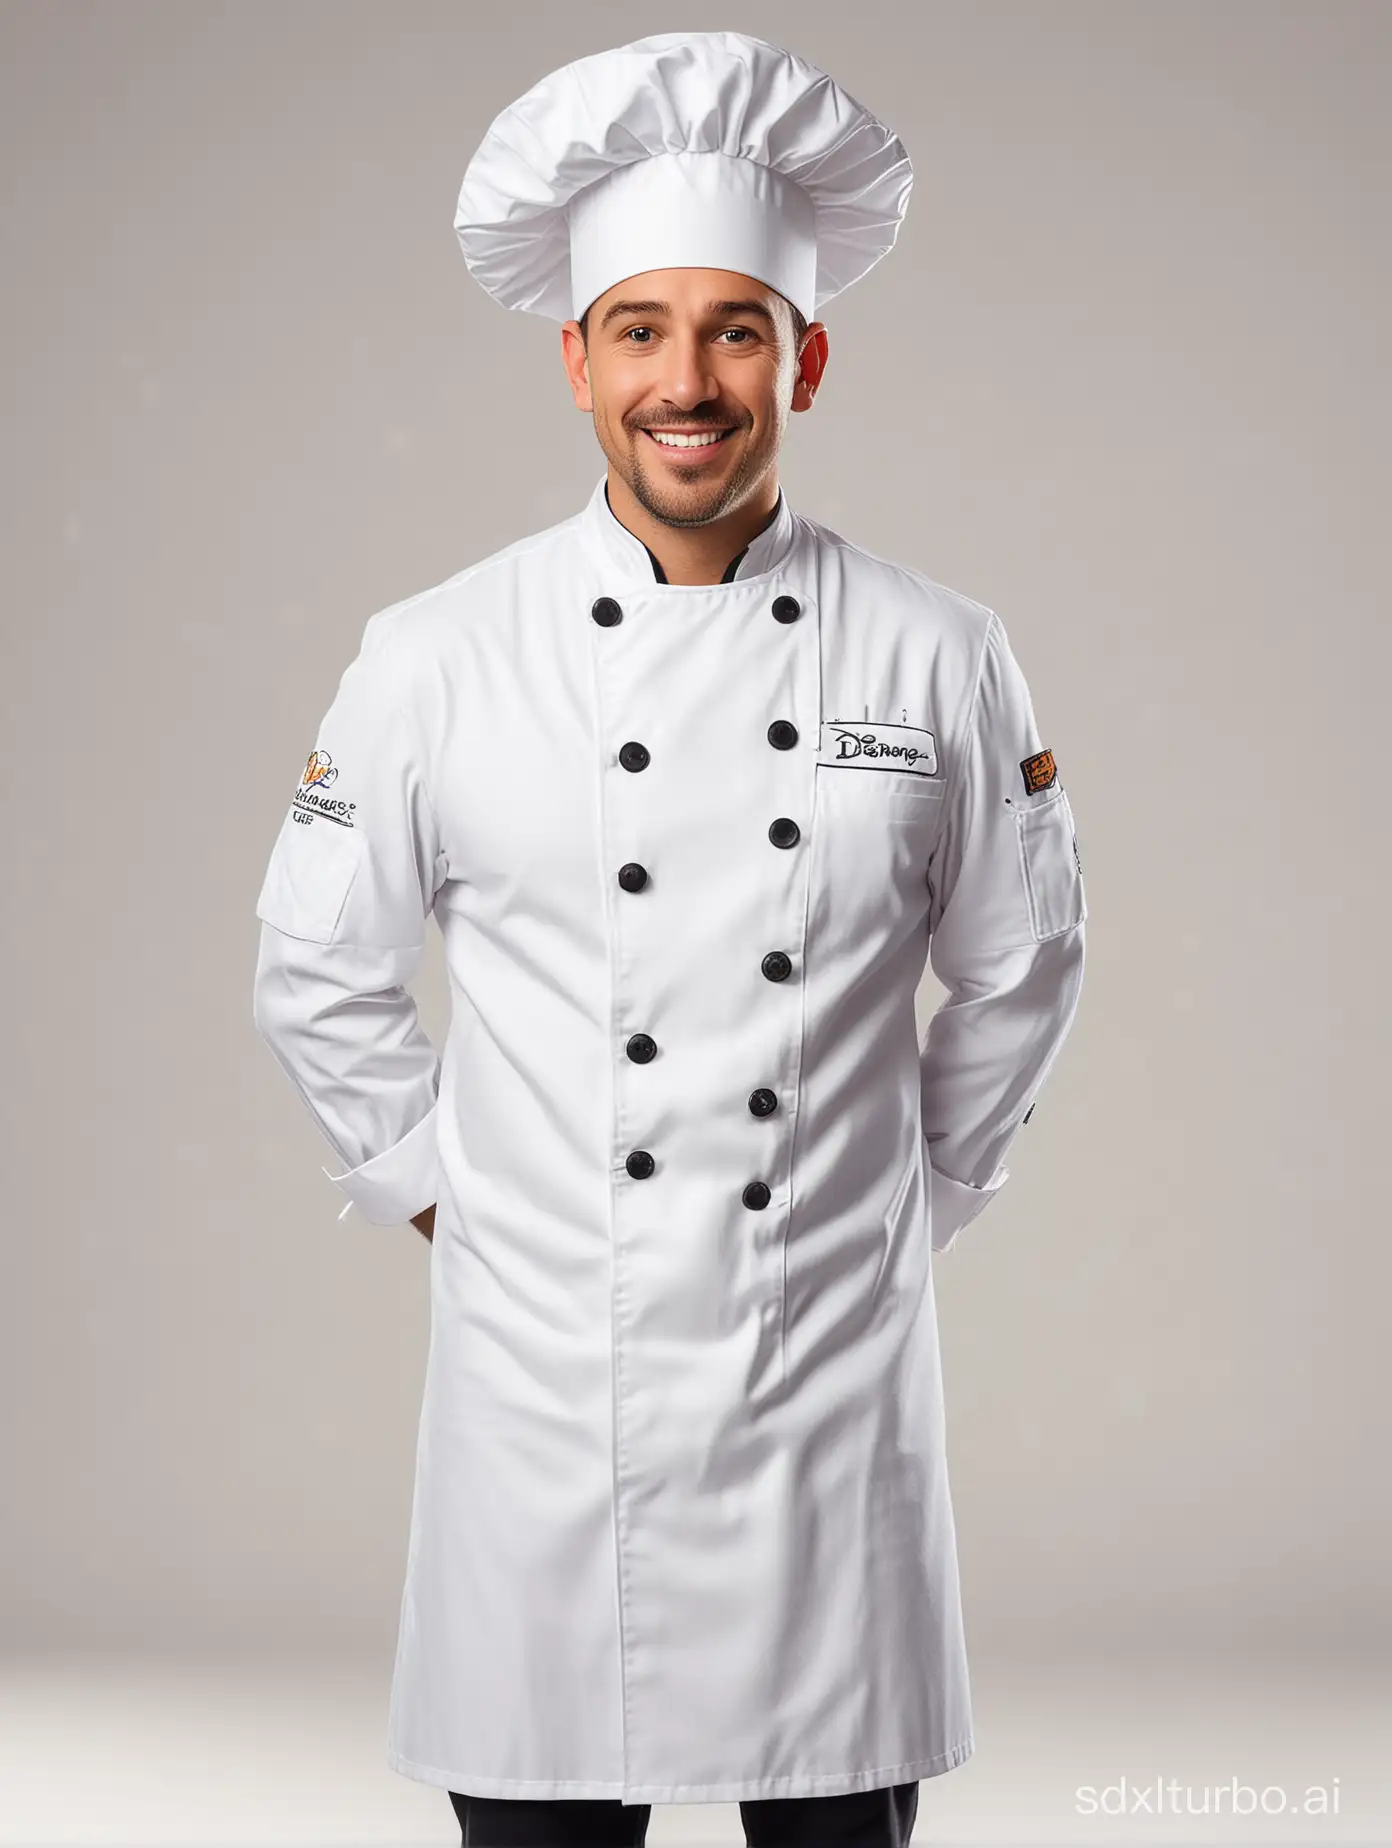 Disneystyle-Chef-Character-in-Professional-Uniform-Against-Bright-White-Background